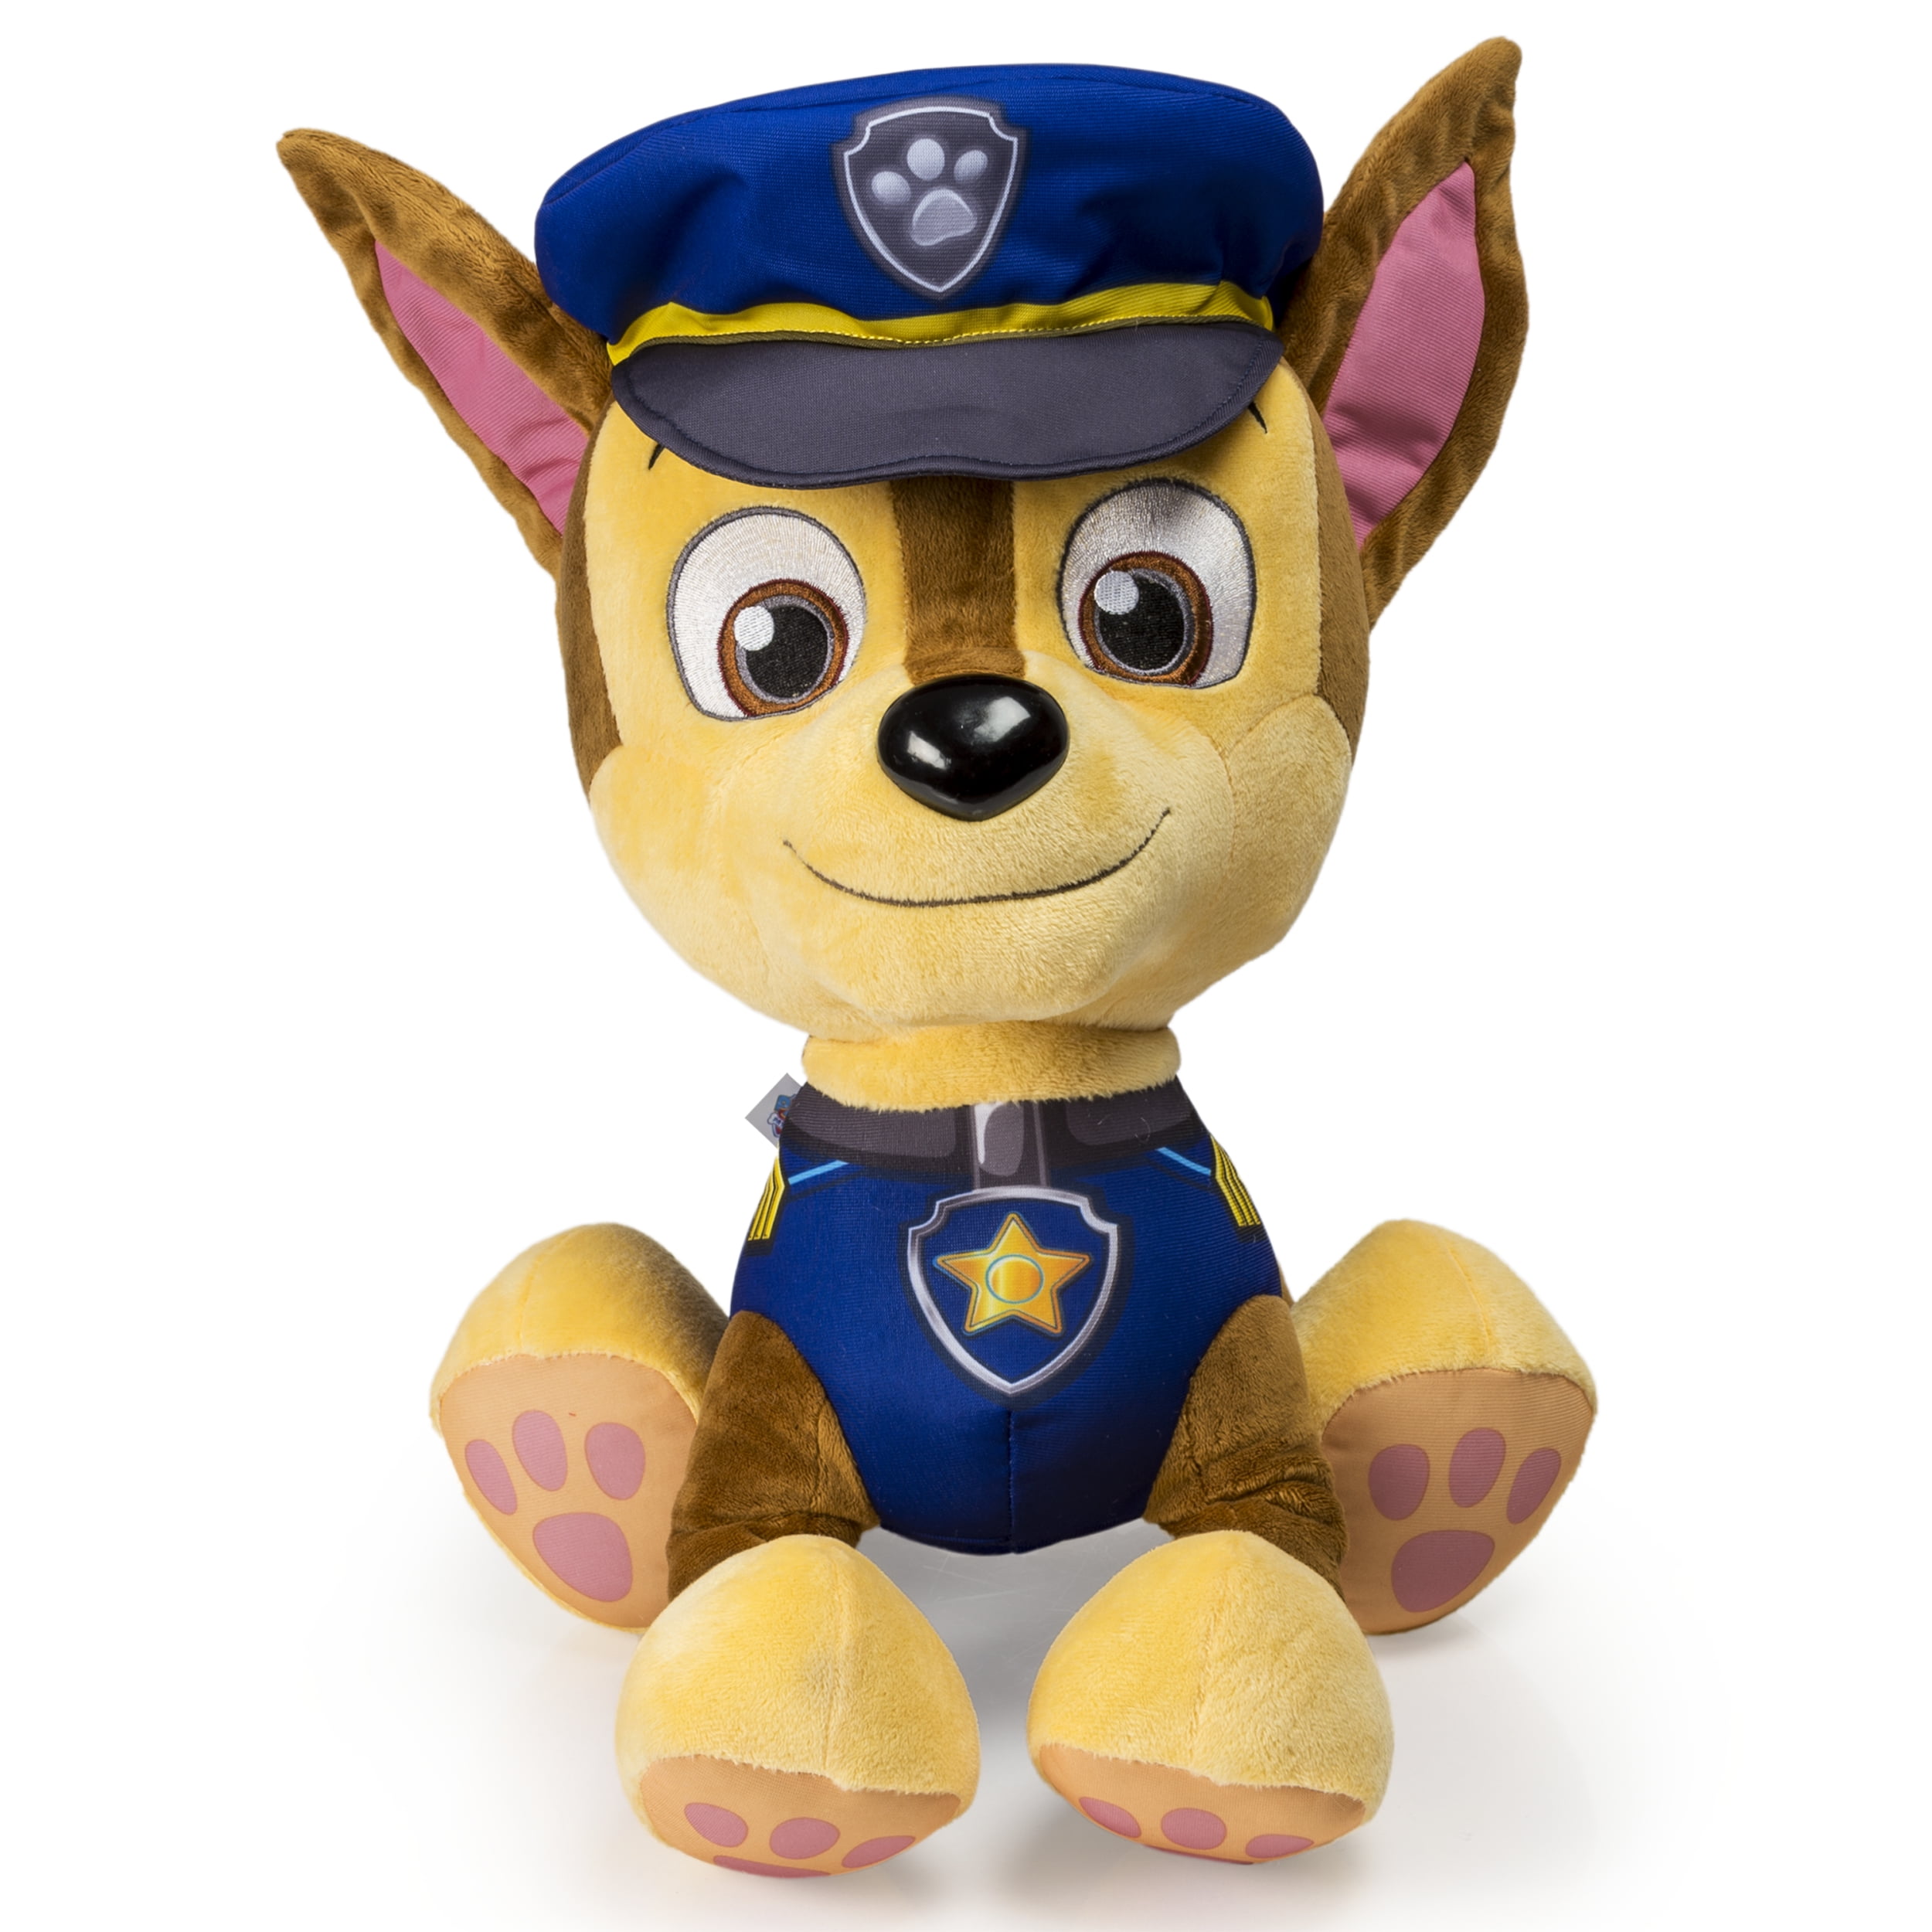 Paw Patrol 20cm Chase Plush Teddy Pup Pals Soft Cuddle Figure Character Stuffed